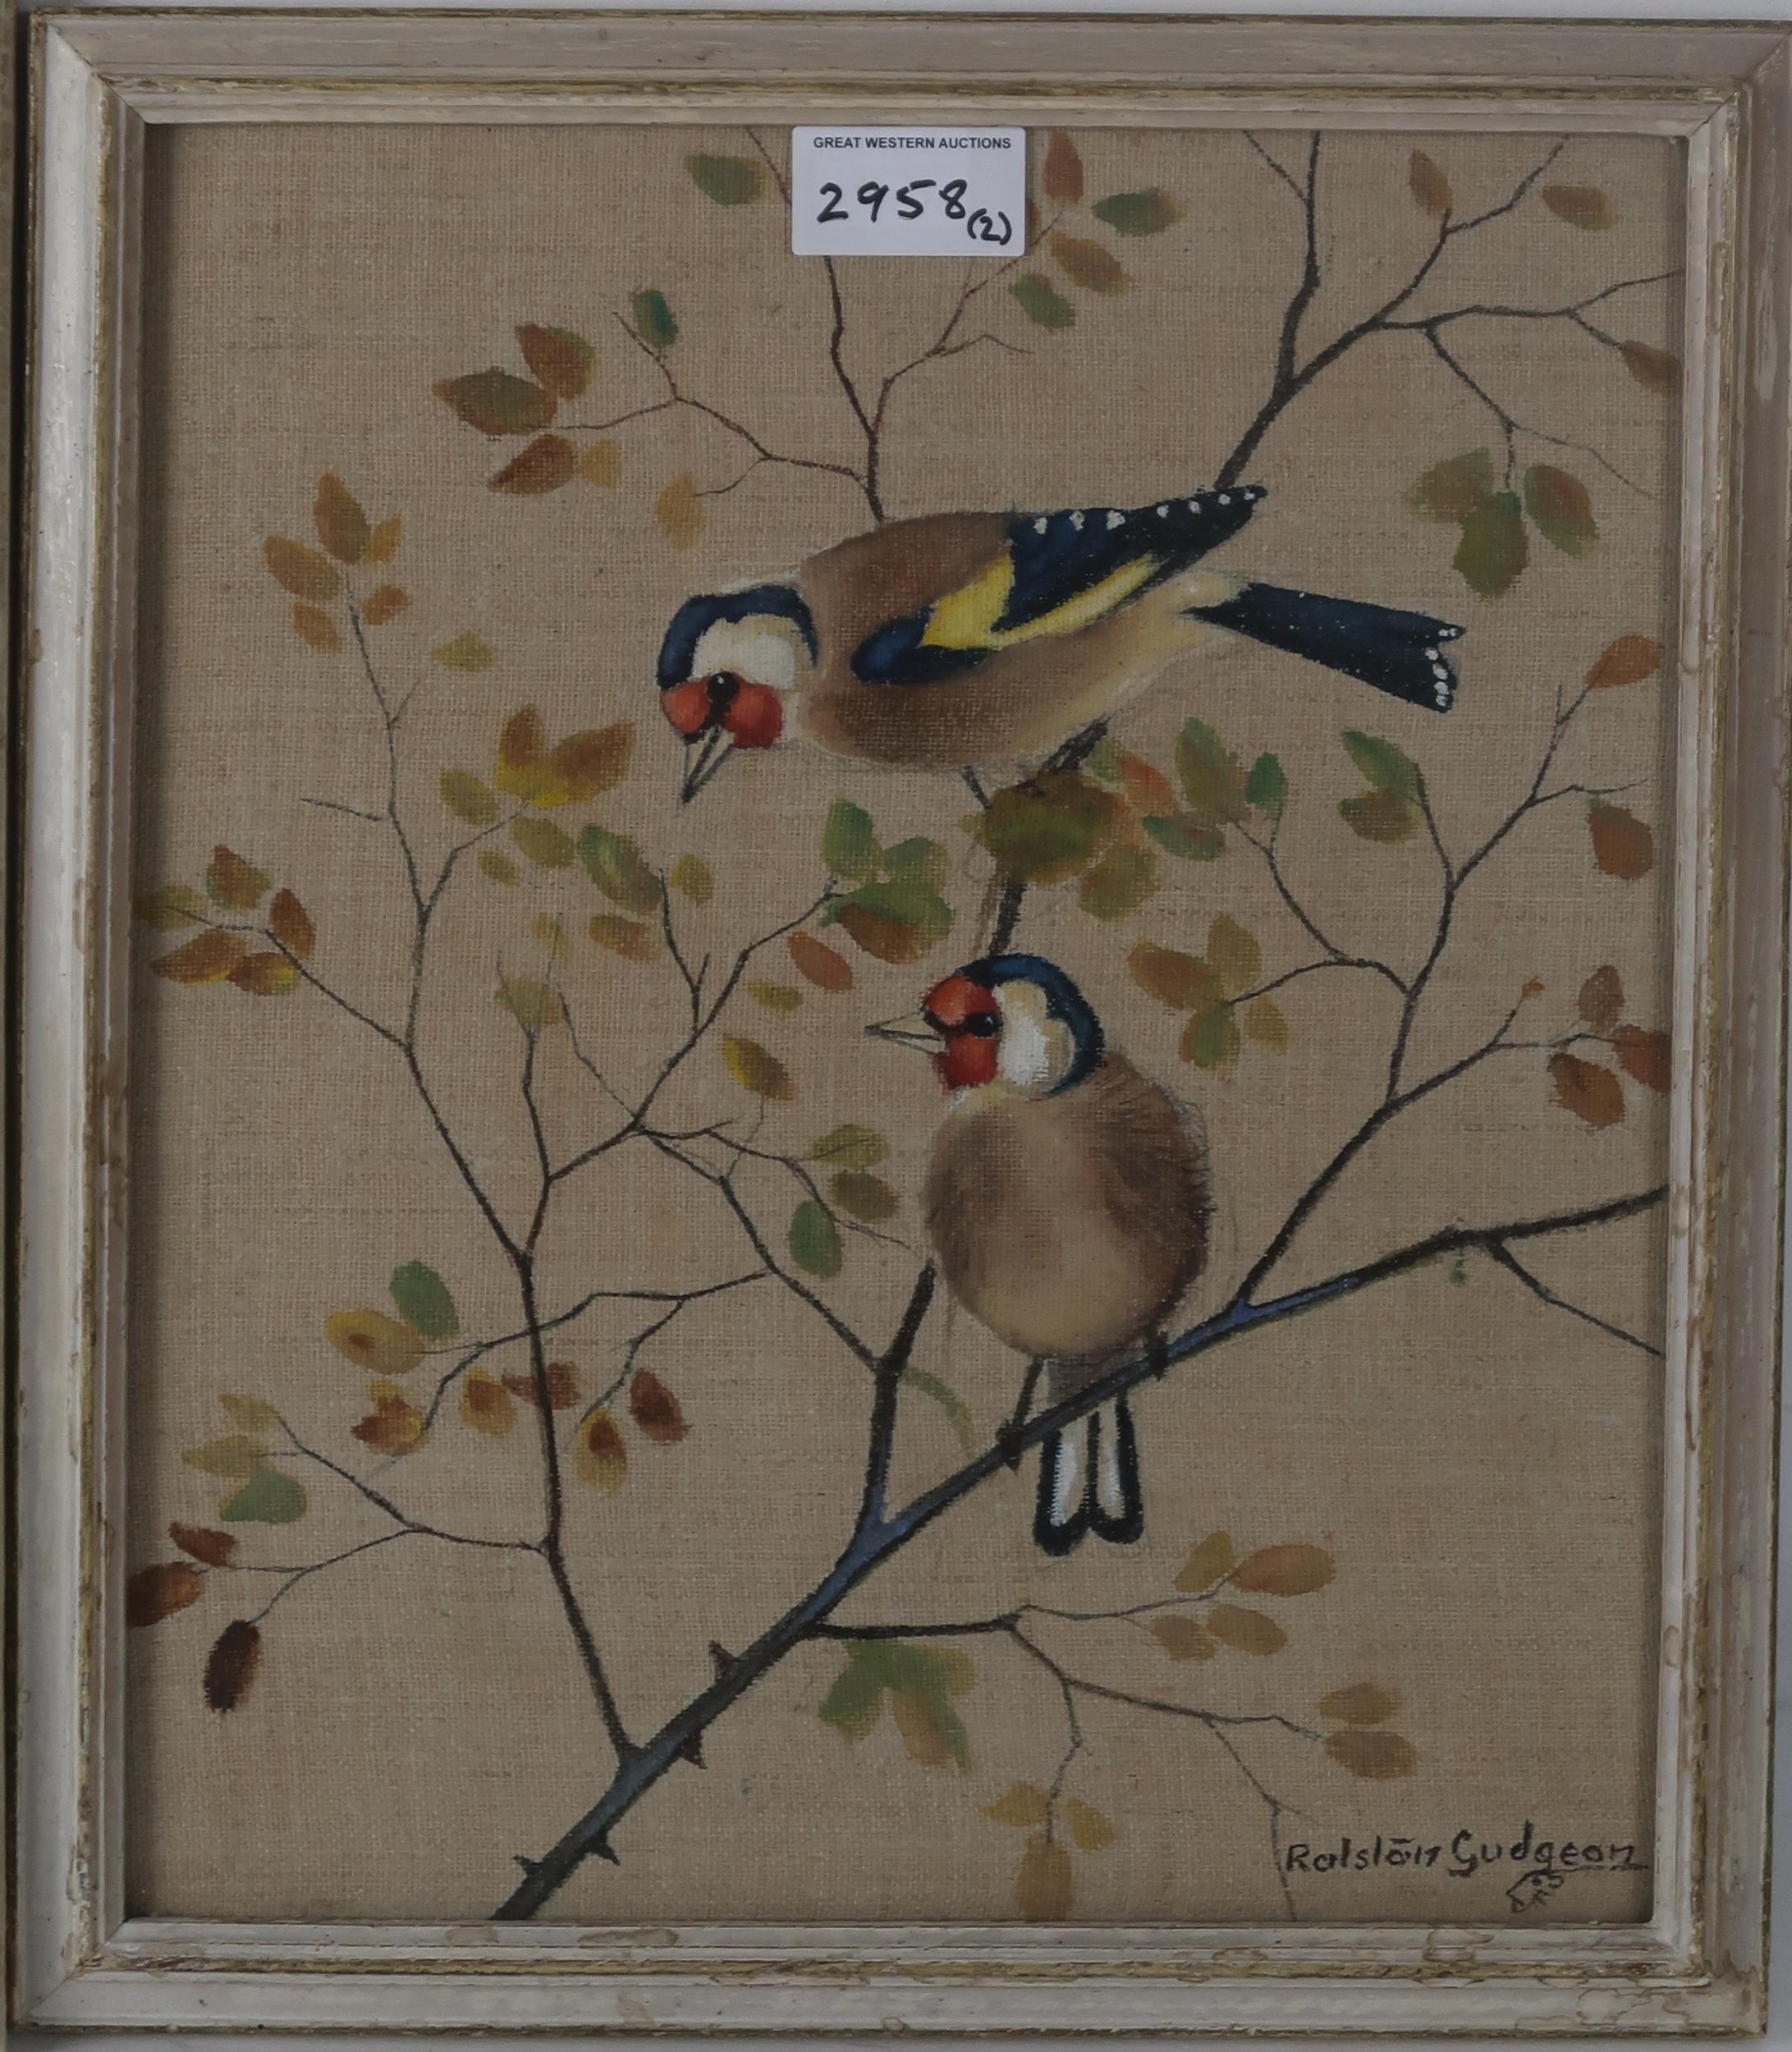 RALSTON GUDGEON (SCOTTISH 1910-1984) GOLDFINCHES Gouache on linen, signed lower right, 29.5 x - Image 3 of 4